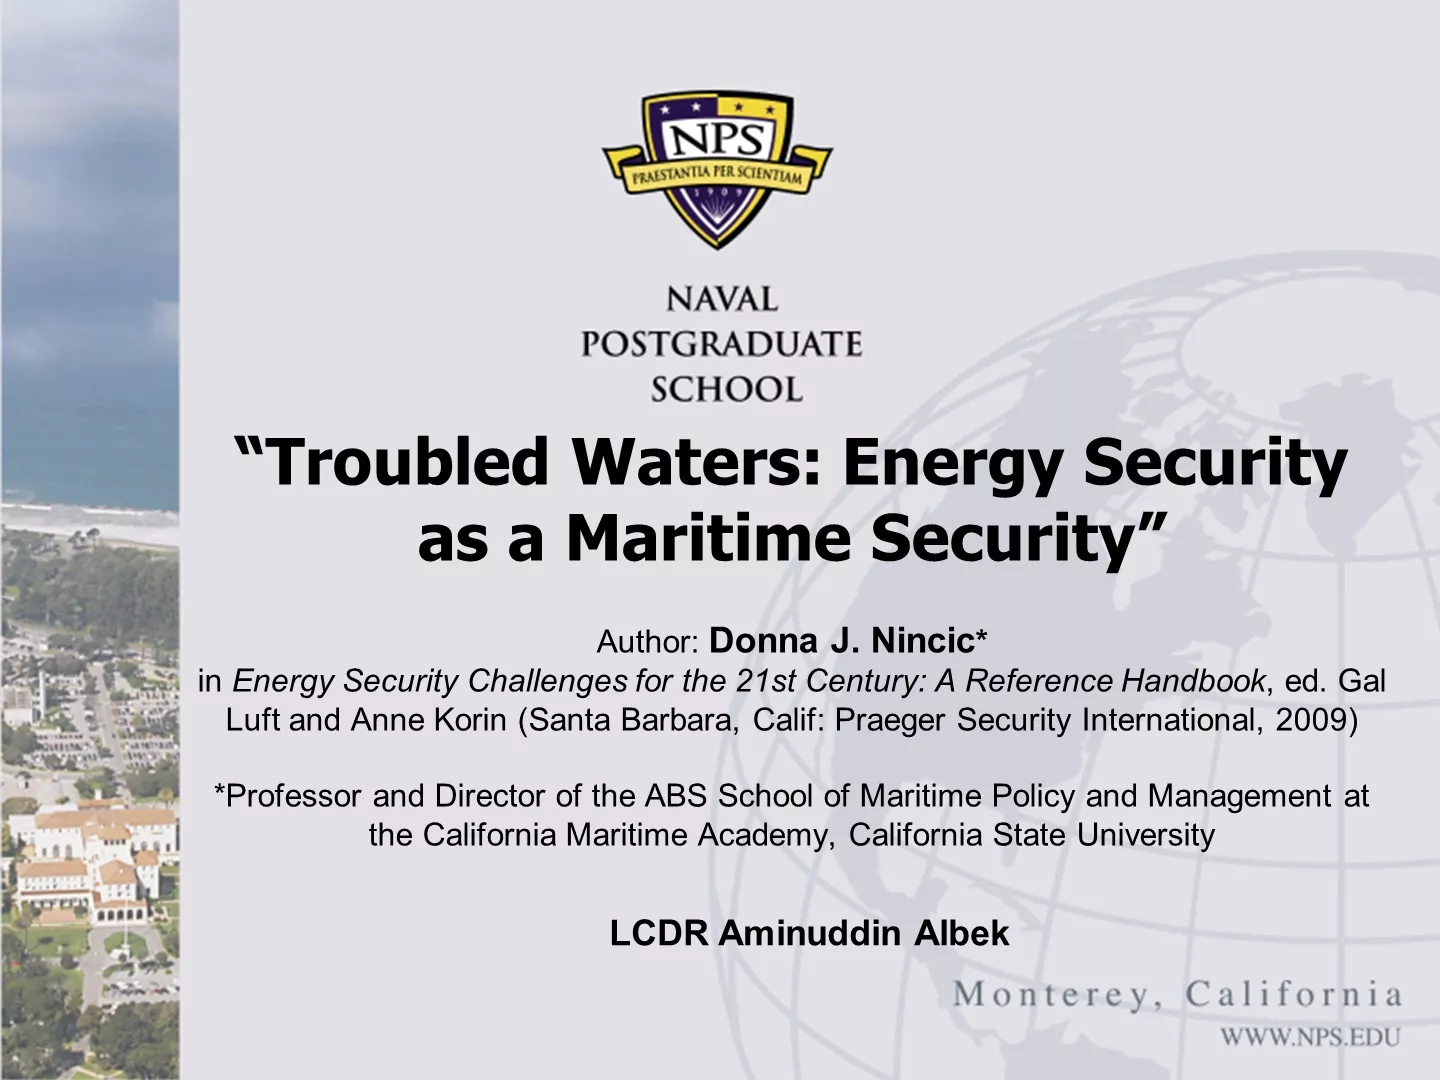 Troubled Waters: Energy Security as a Maritime Security